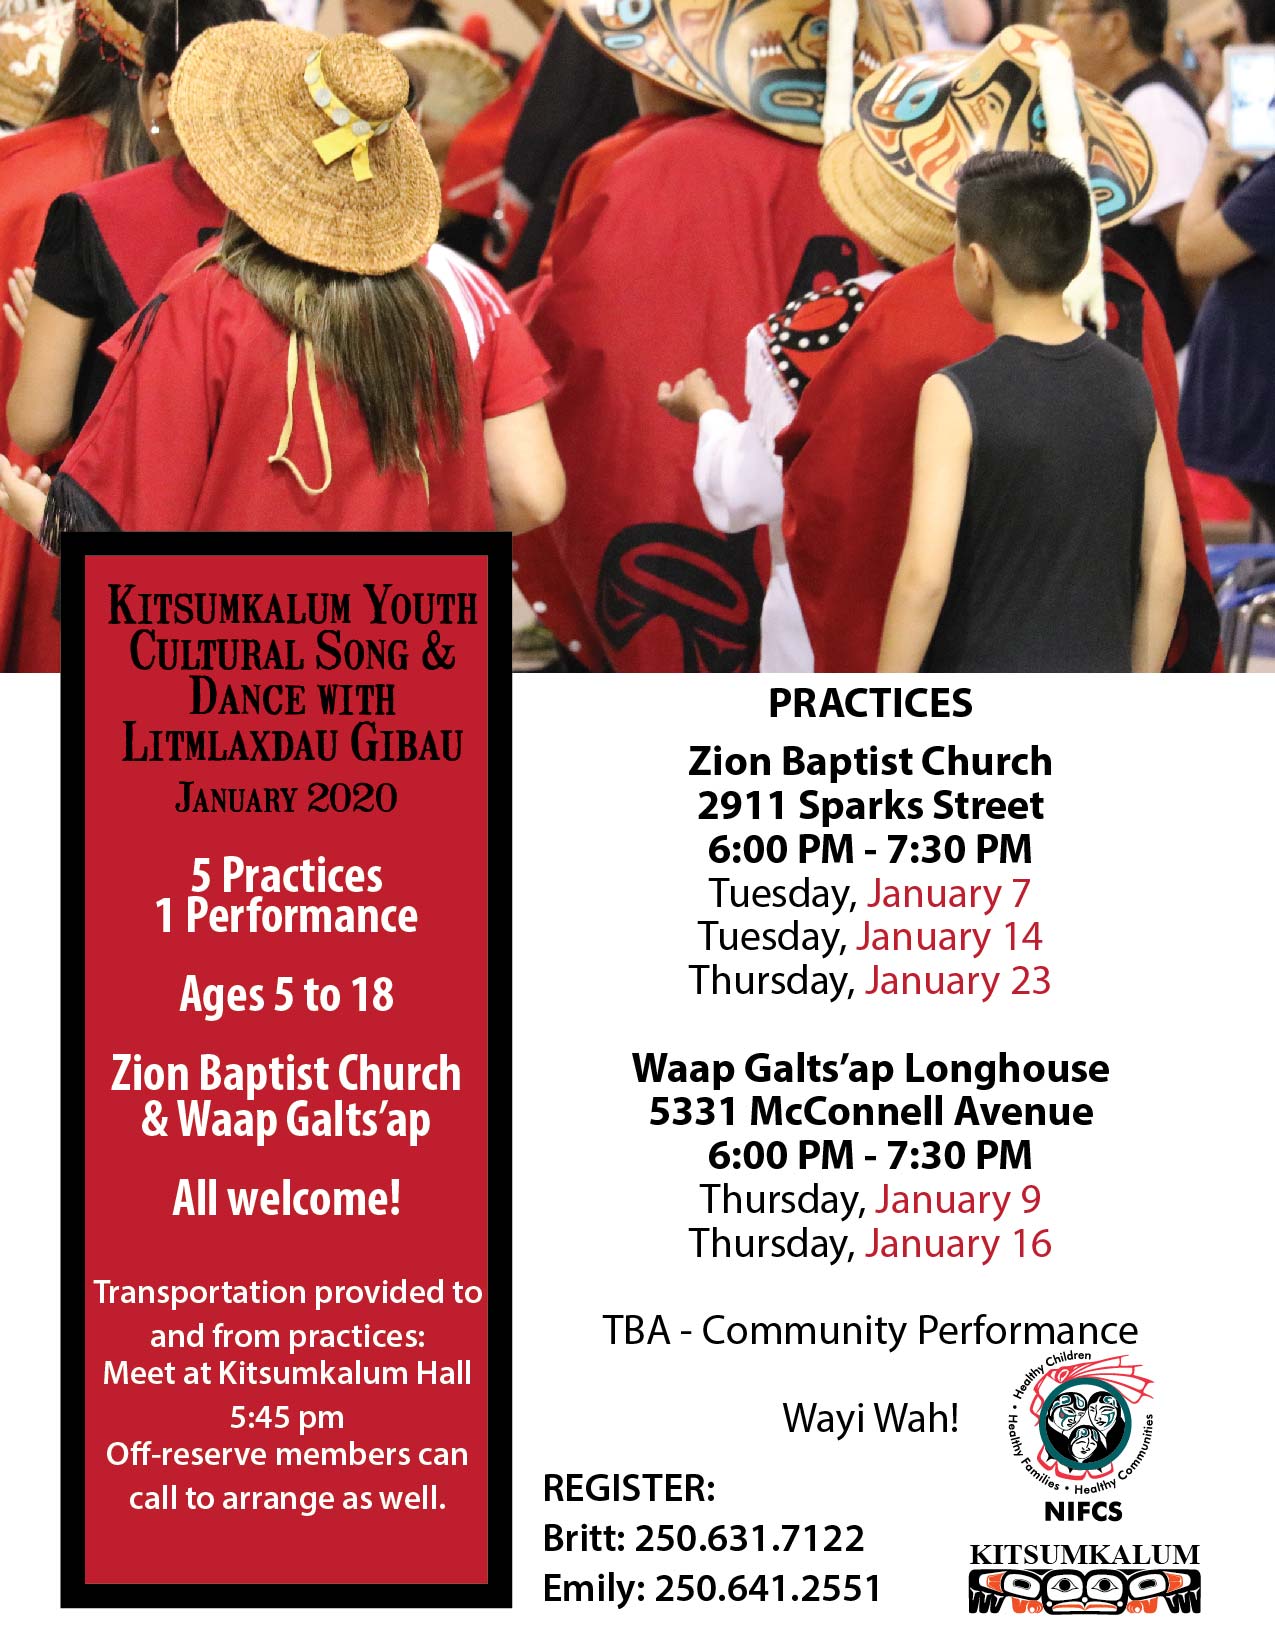 Cultural Song and Dance for Kitsumkalum Youth January 2020